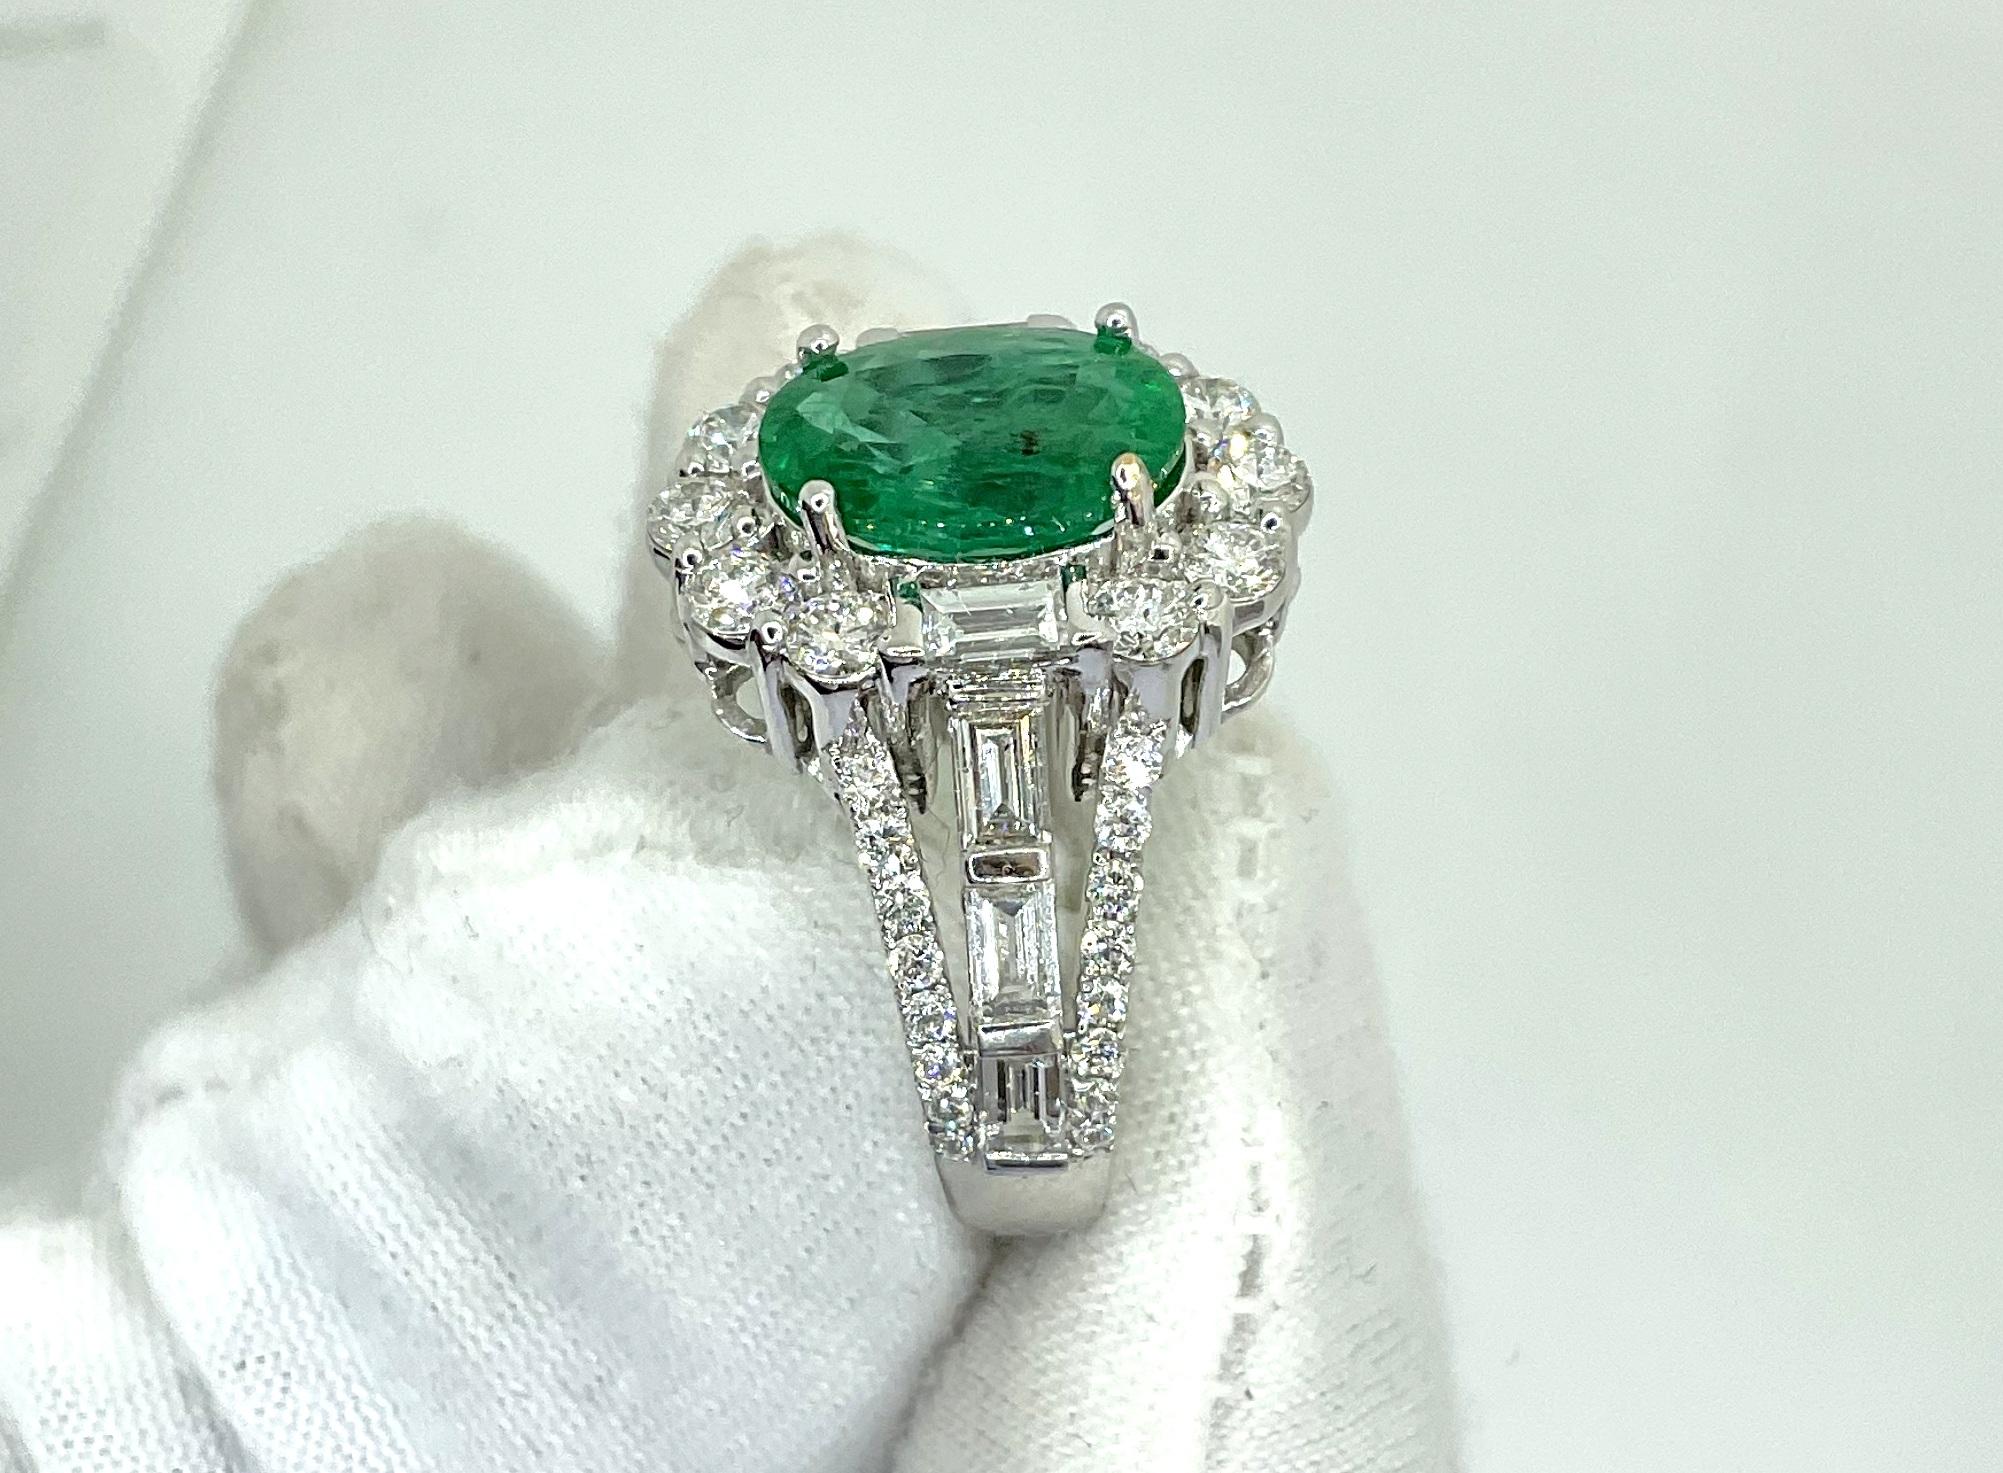 18k Gold Art Deco Zambian Emerald Cocktail Ring 2.05 cts with 1.49 ct Diamonds  For Sale 2